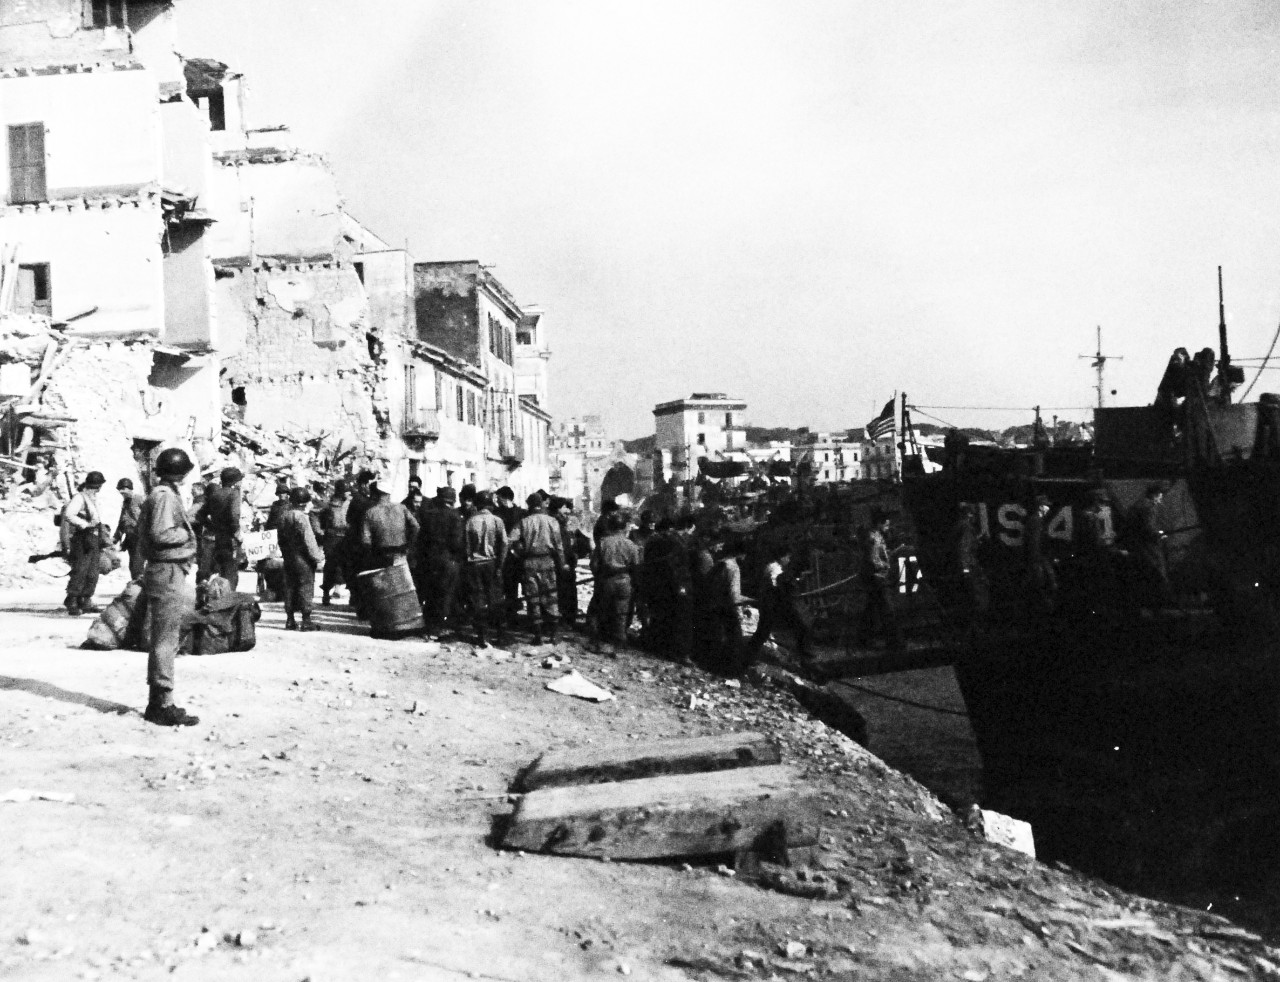 80-G-59386:   Battle of Anzio, January-June 1944.    Nazi troops, now prisoners of war, boarding an LCI at Anzio, Italy, following their surrender in February 1944.   Photograph possibly received on 28 April 1944.    Official U.S. Navy Photograph, now in he collections of the National Archives.  (2014/03/12).    